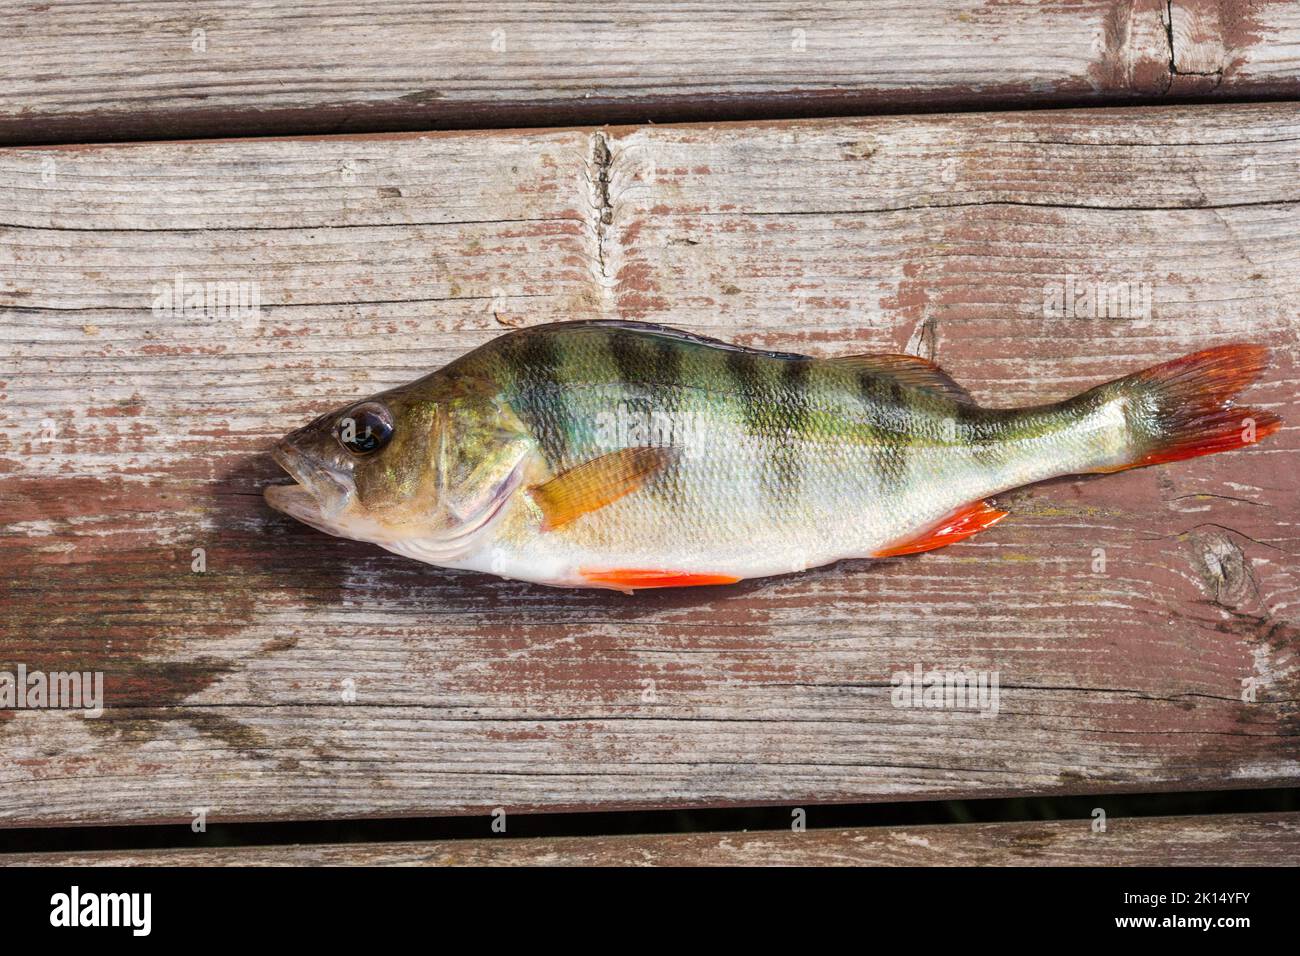 Freshly caught river perch on a wooden background. A beautiful freshwater fish with red orange black fins and scales in silver green and dark colors, Stock Photo